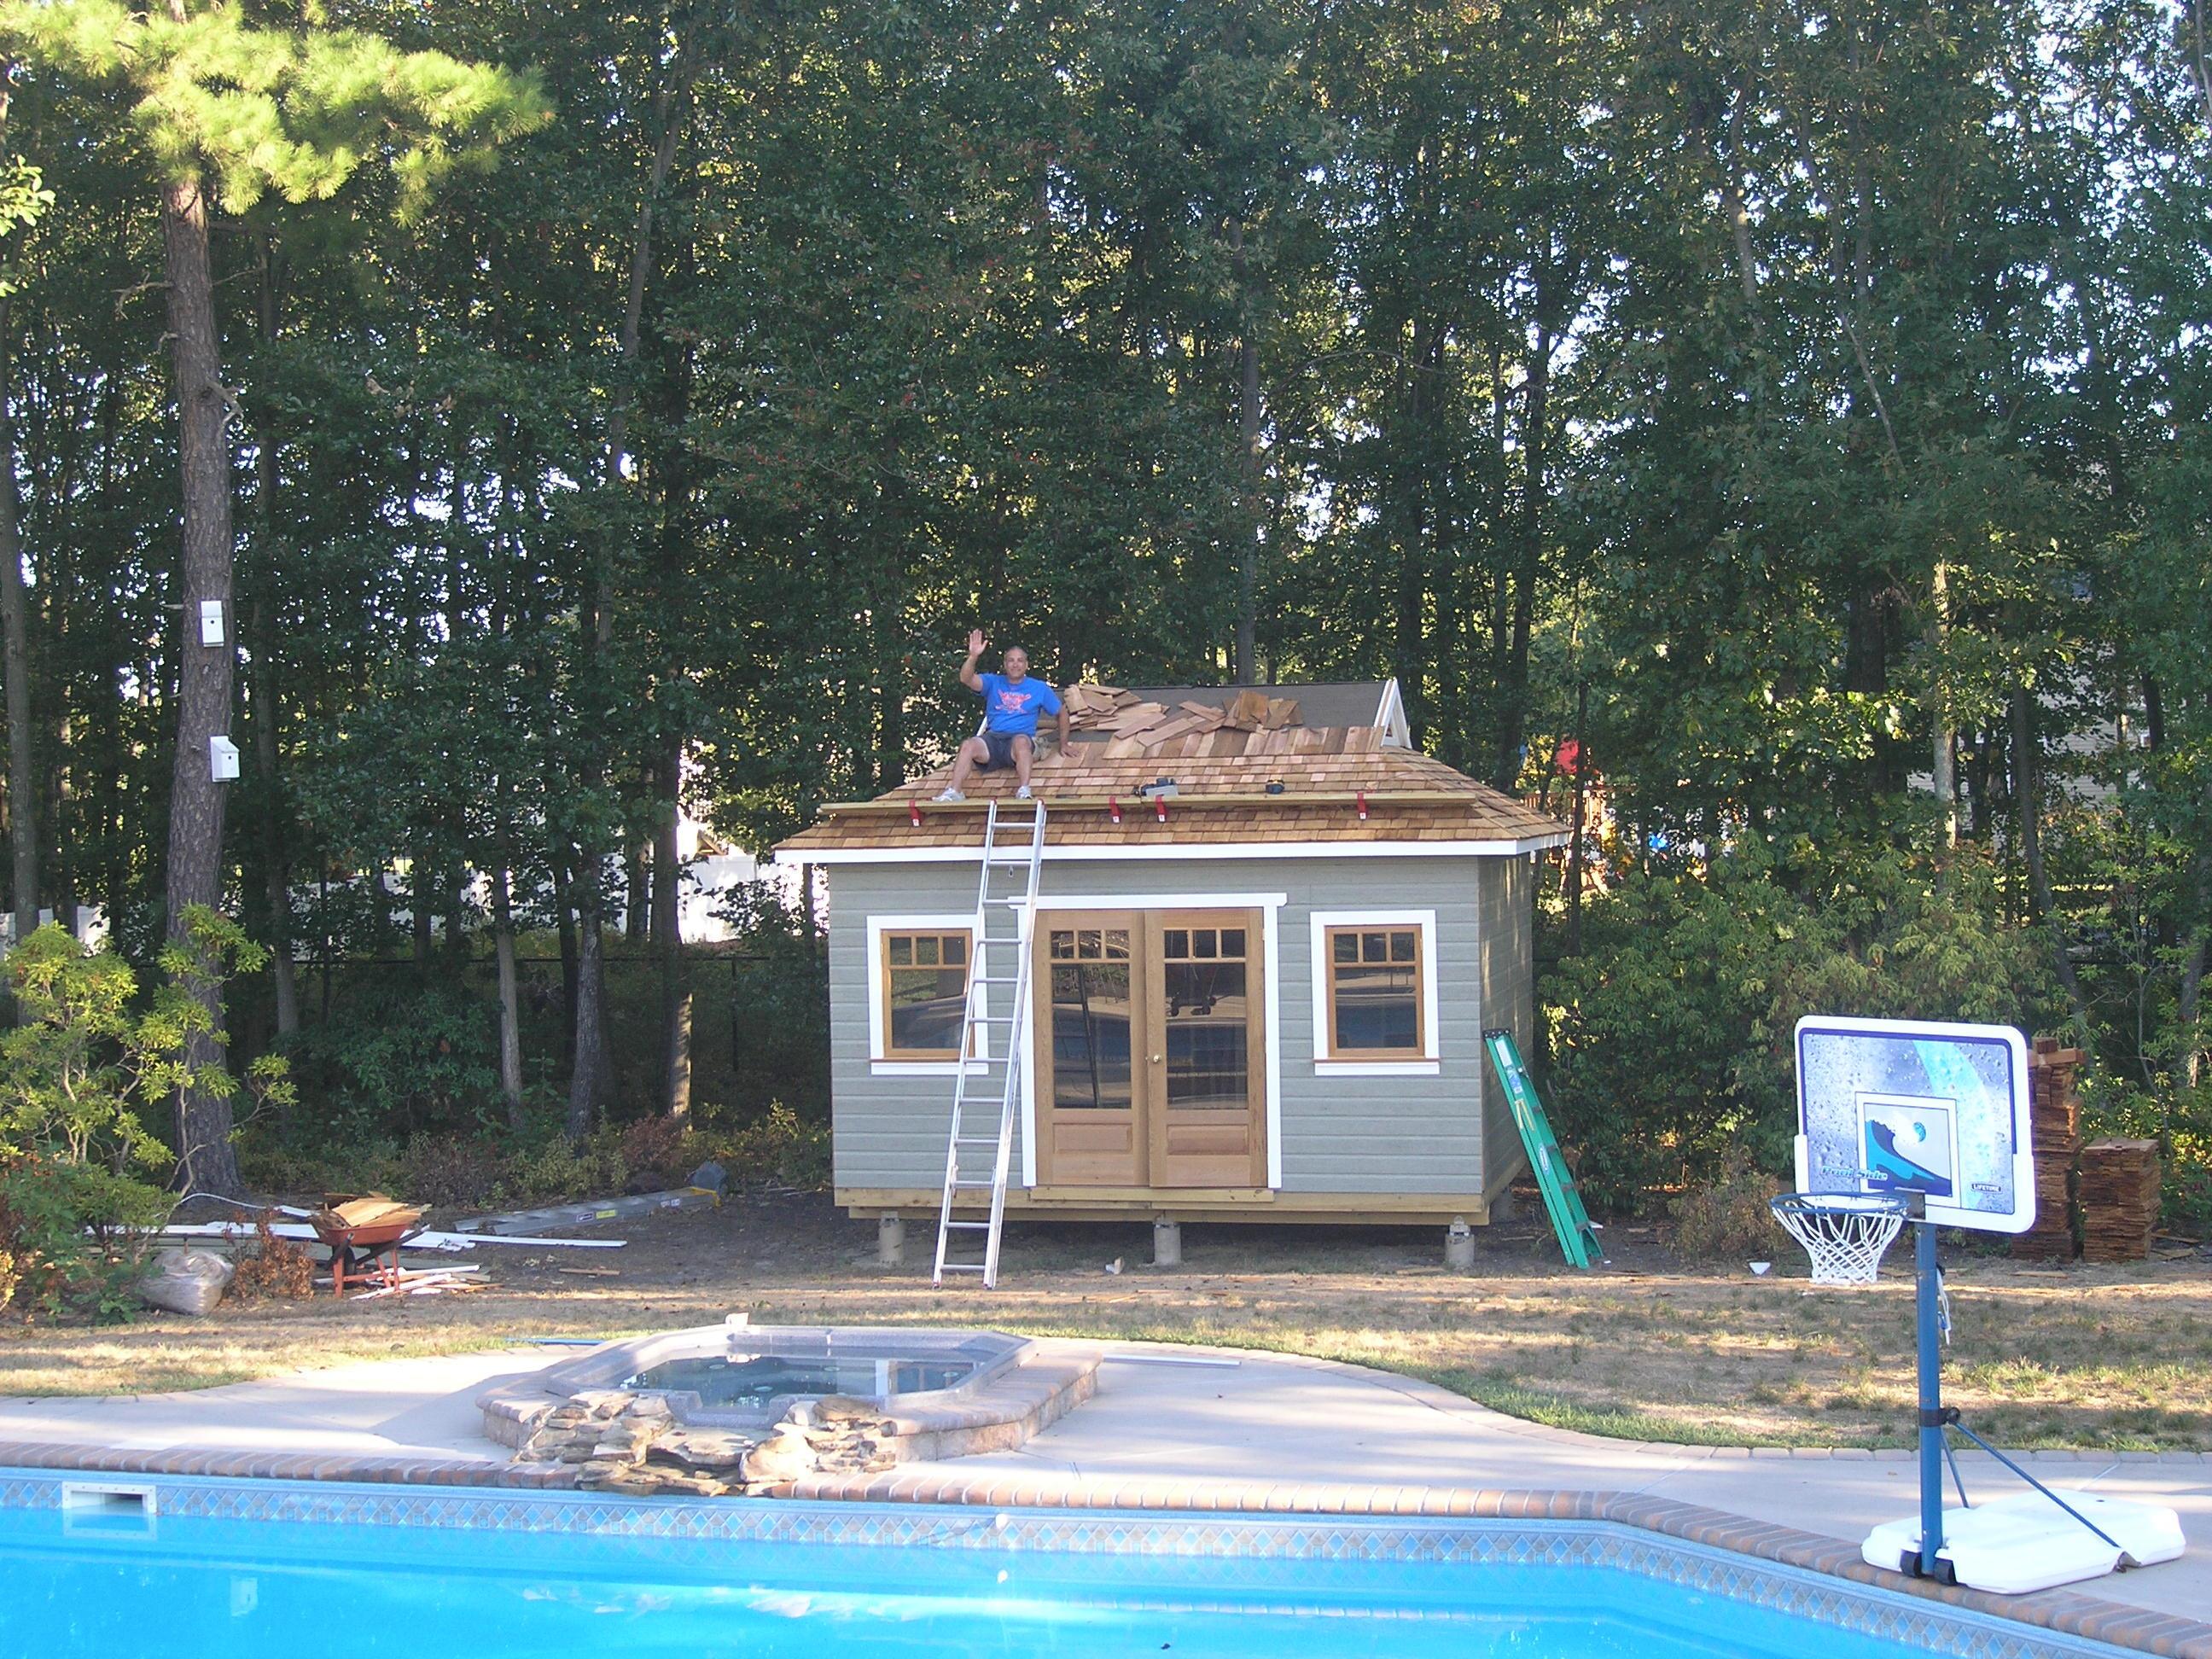 Santa cruz pool cabana 12x16 with arts and crafts double doors in Jackson New Jersey. ID number 1849